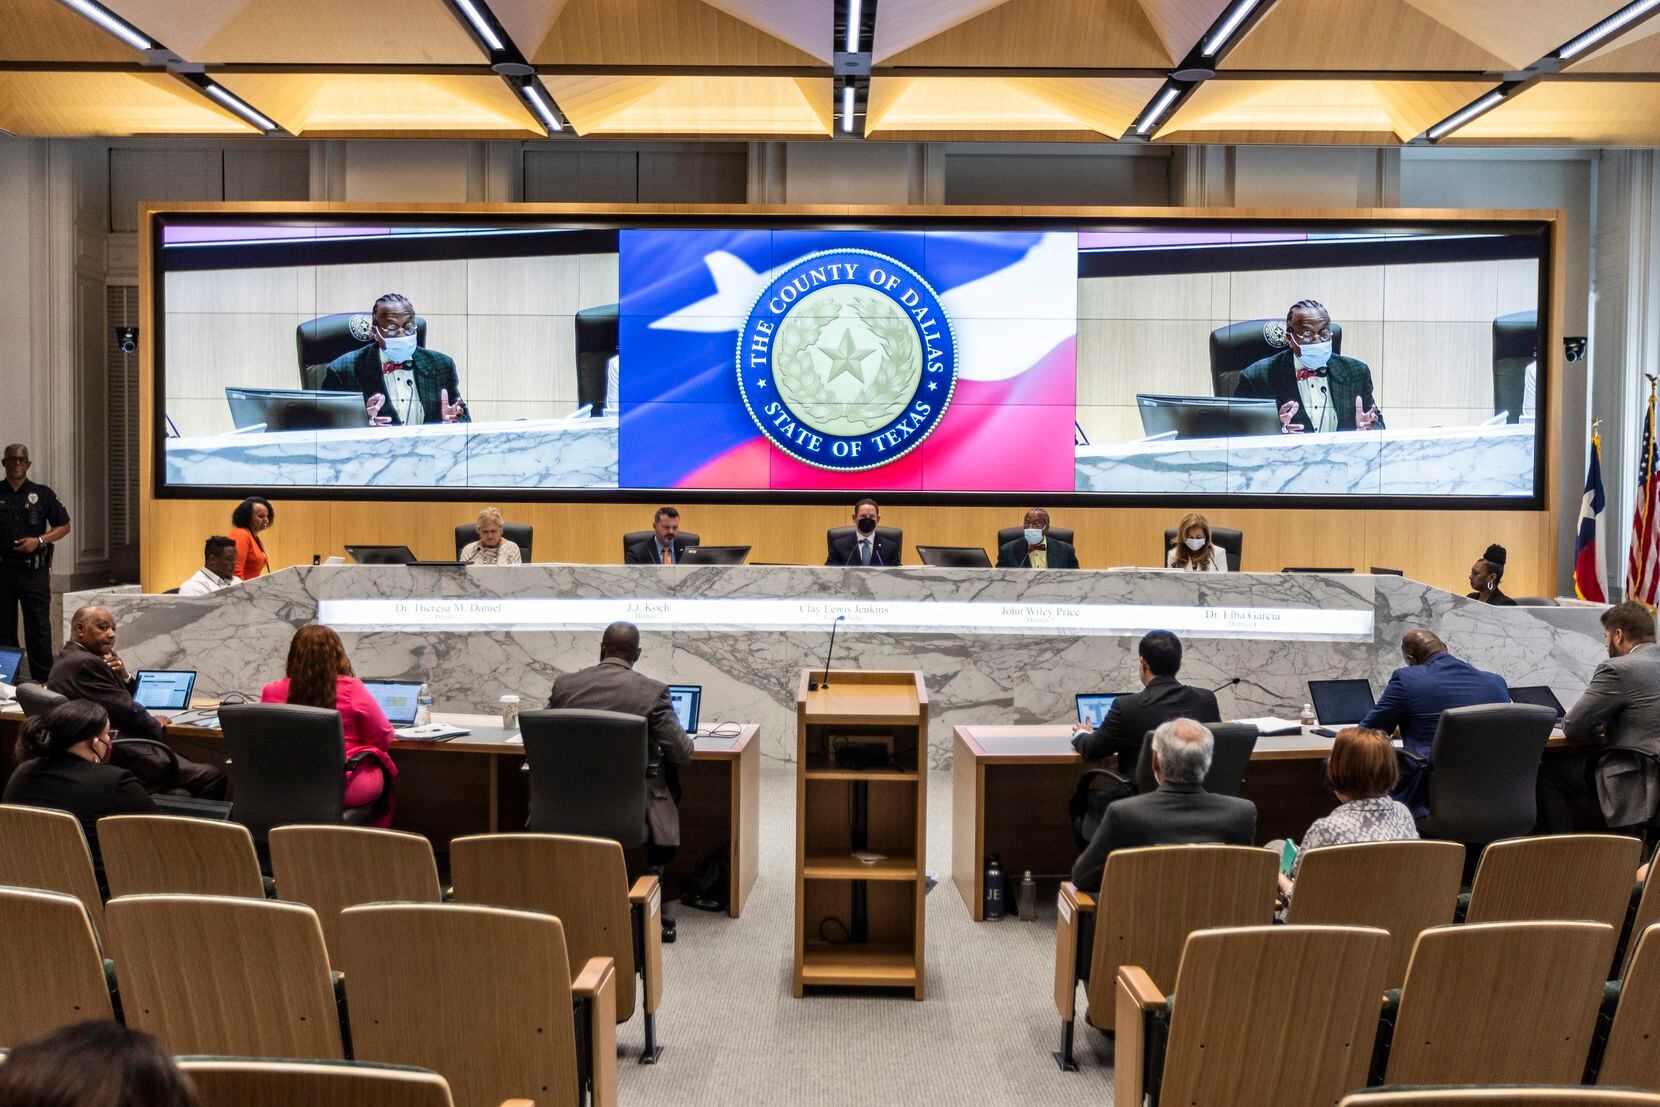 Dallas County commissioners held their first meeting at the newly renovated Dallas County...